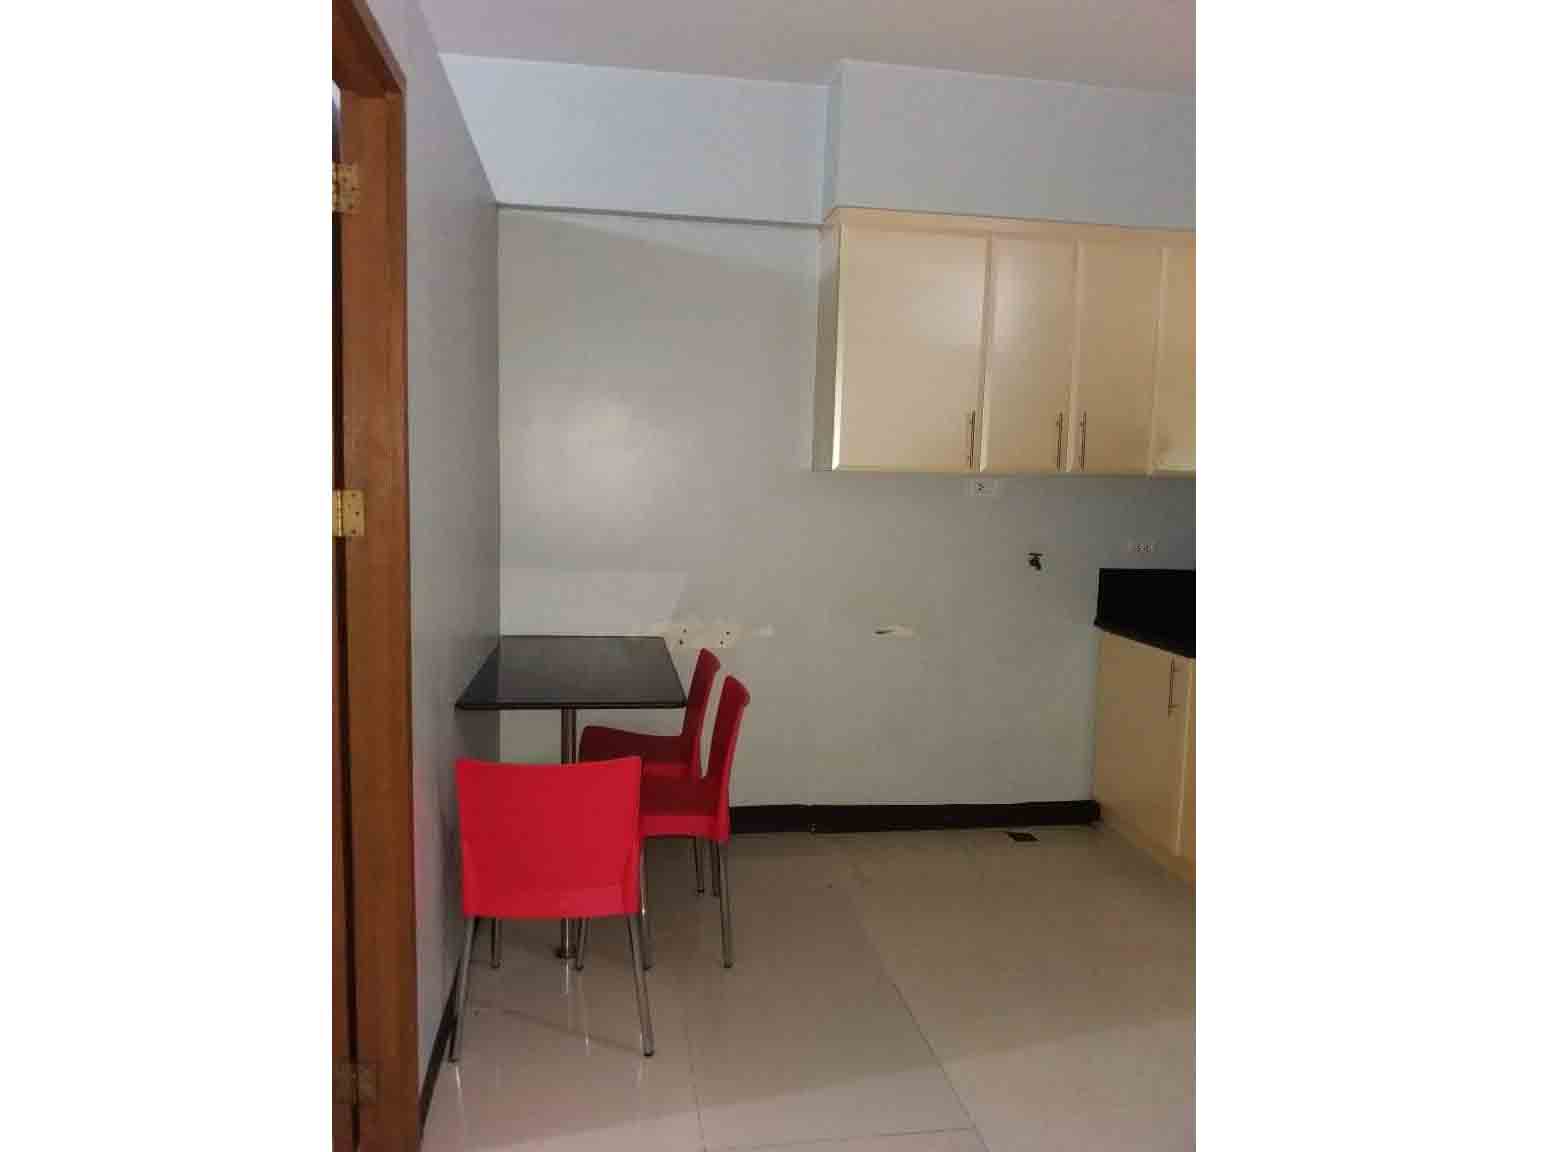 1BR Condo for Sale in Morgan Suites Executive Residences, McKinley Hill, Taguig